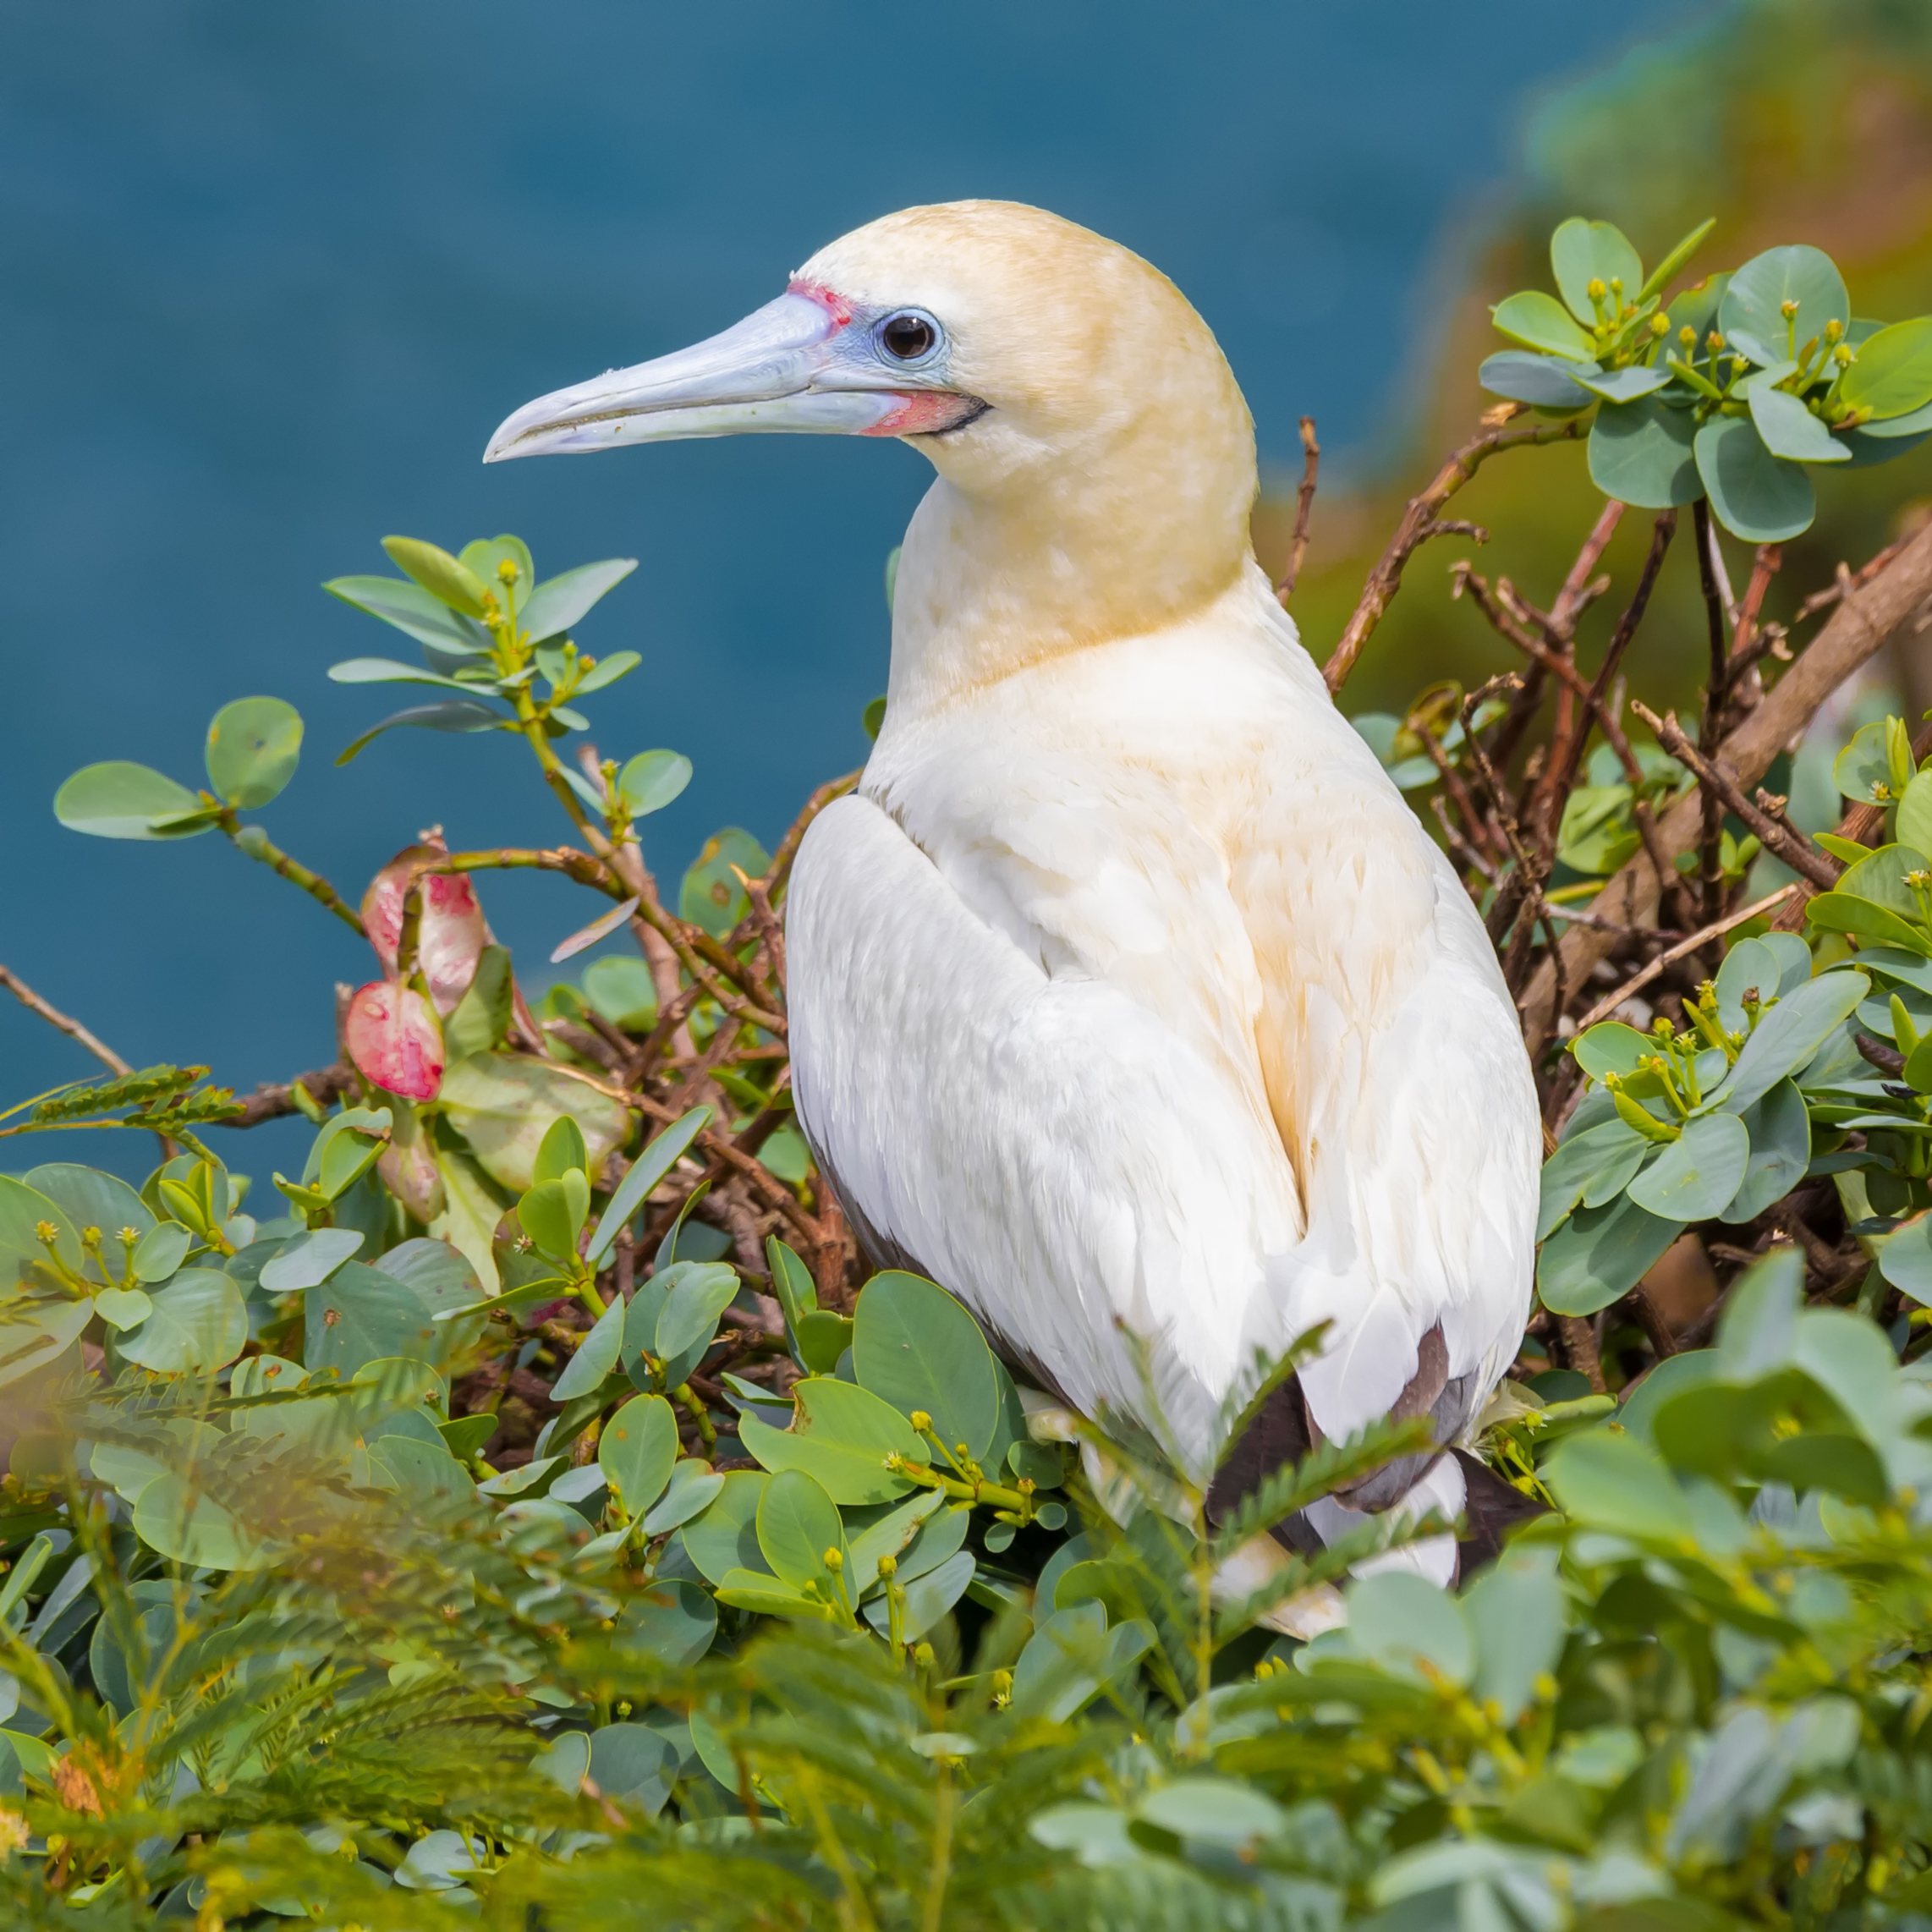 Red-footed booby at Kīlauea Point National Wildlife Refuge